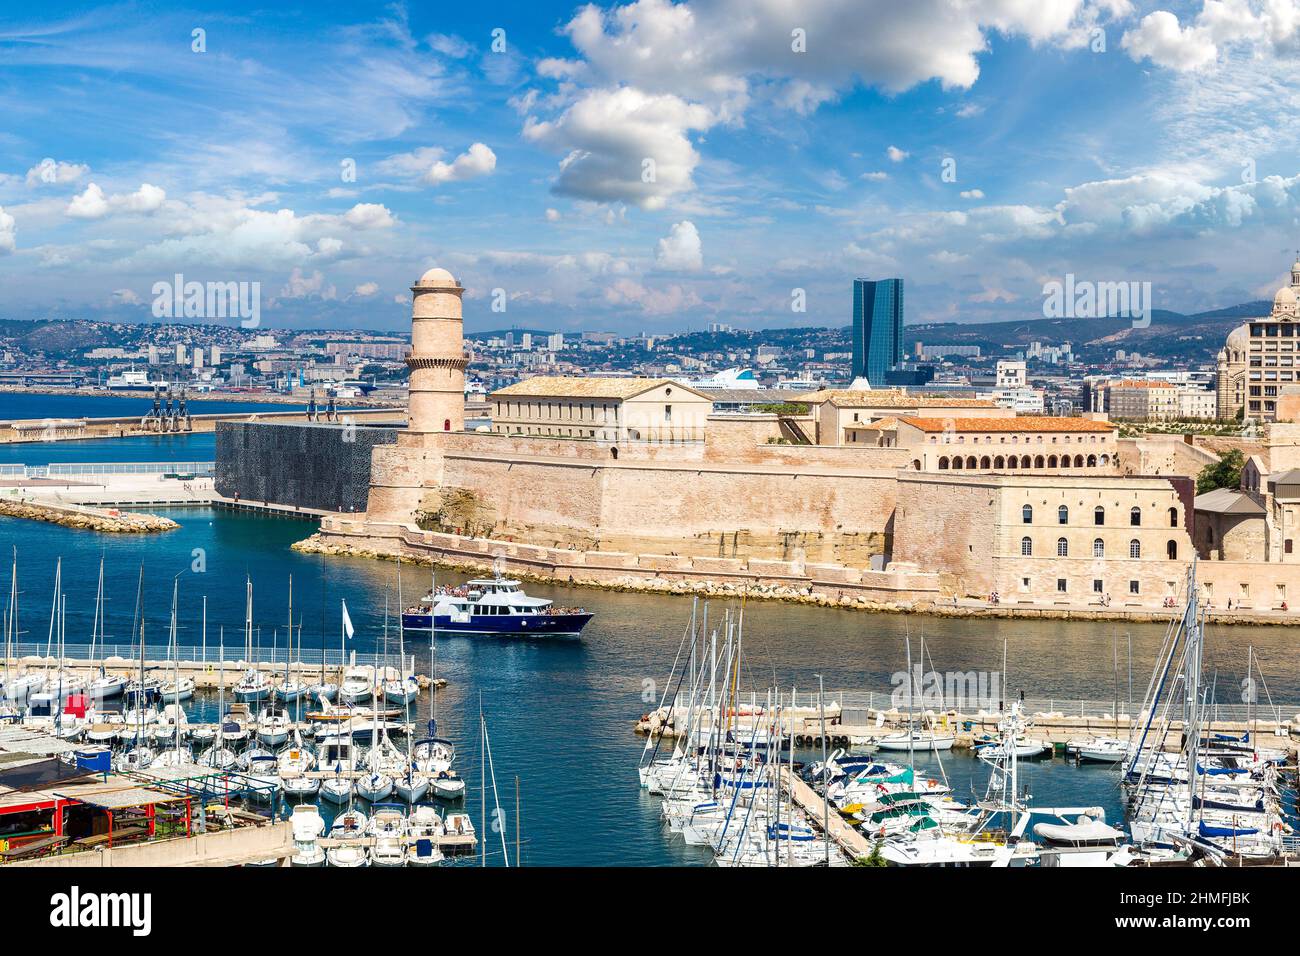 Saint Jean Castle and Cathedral de la Major and the Vieux port in Marseille, France Stock Photo